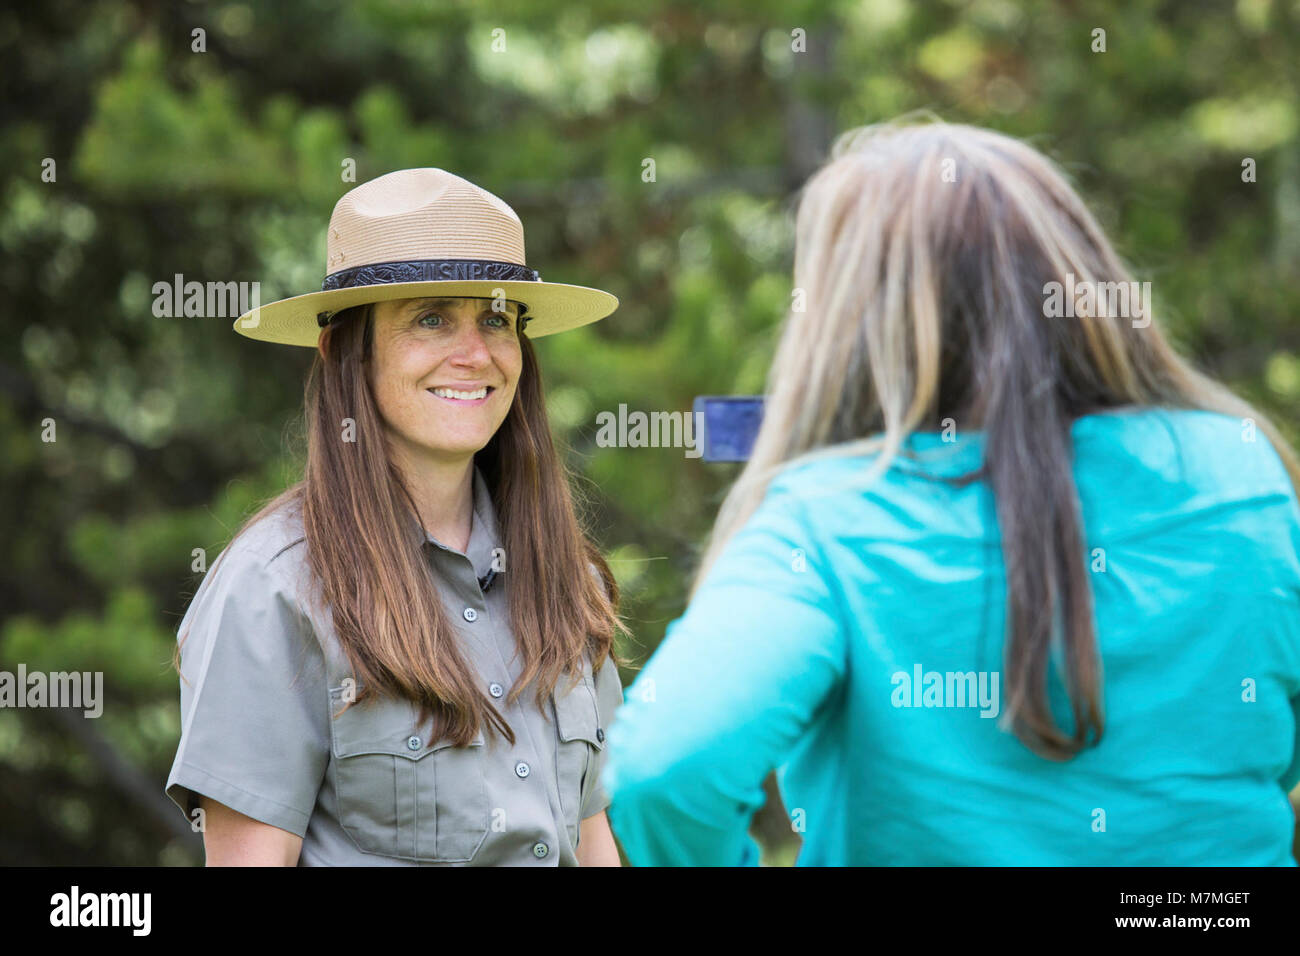 Public Information Officer being interviewed by a local reporter; June 2015; Stock Photo